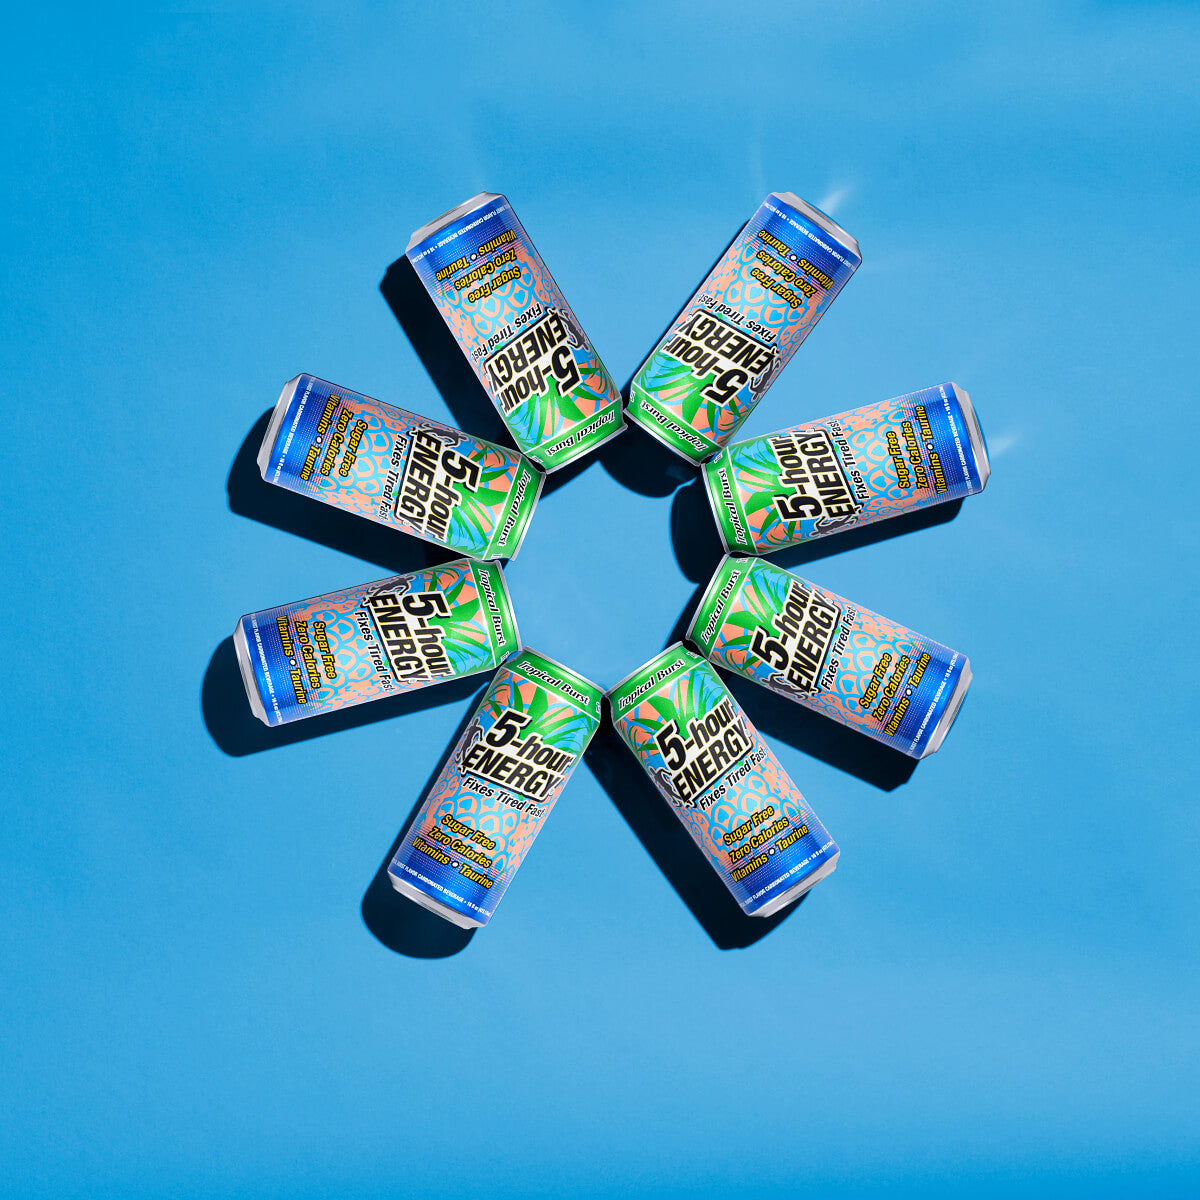 8 cans of 5-hour ENERGY Tropical Burst in the shape of a circle